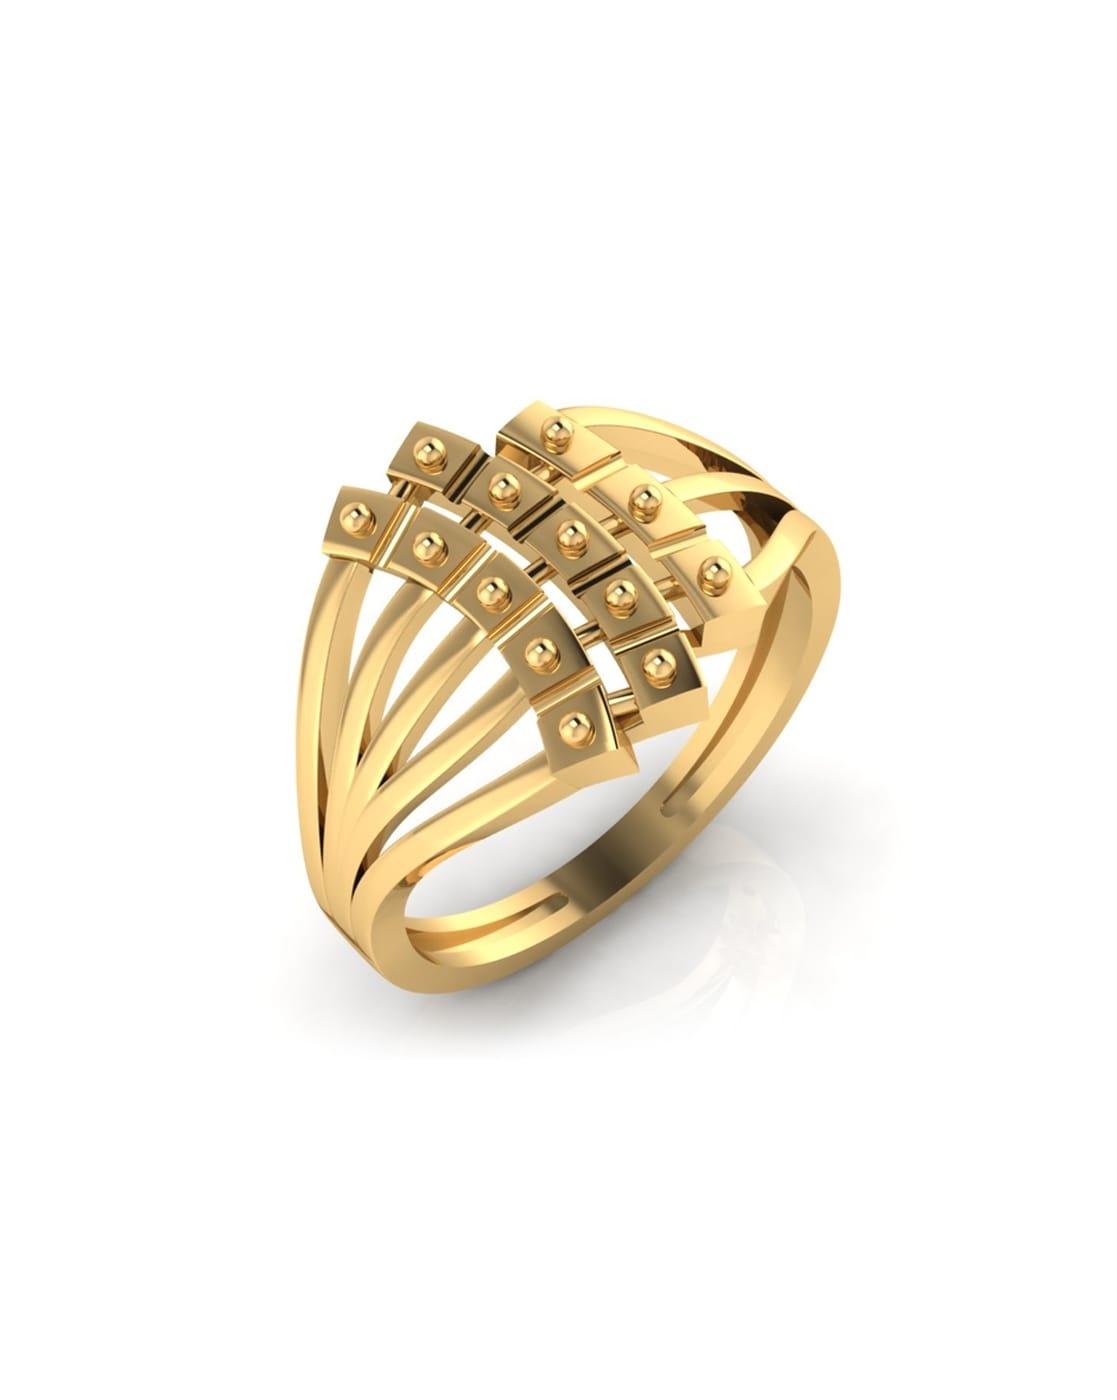 Latest Light 22k Gold Ring Designs with Weight and Price | Gold ring designs,  Couple ring design, Ring designs